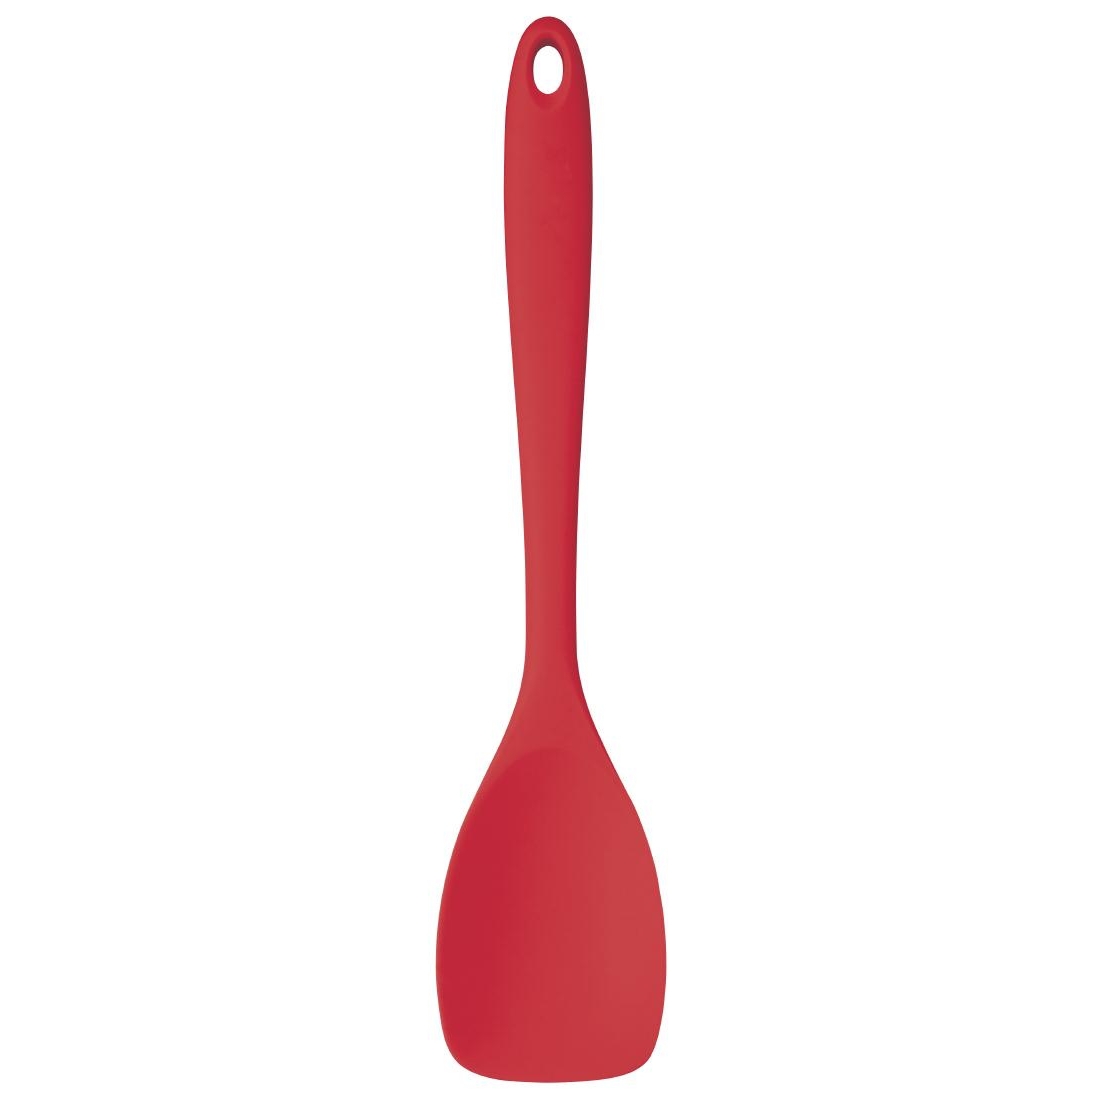 28cm Vogue Silicone Spoon Spatula in Red Dishwasher Safe